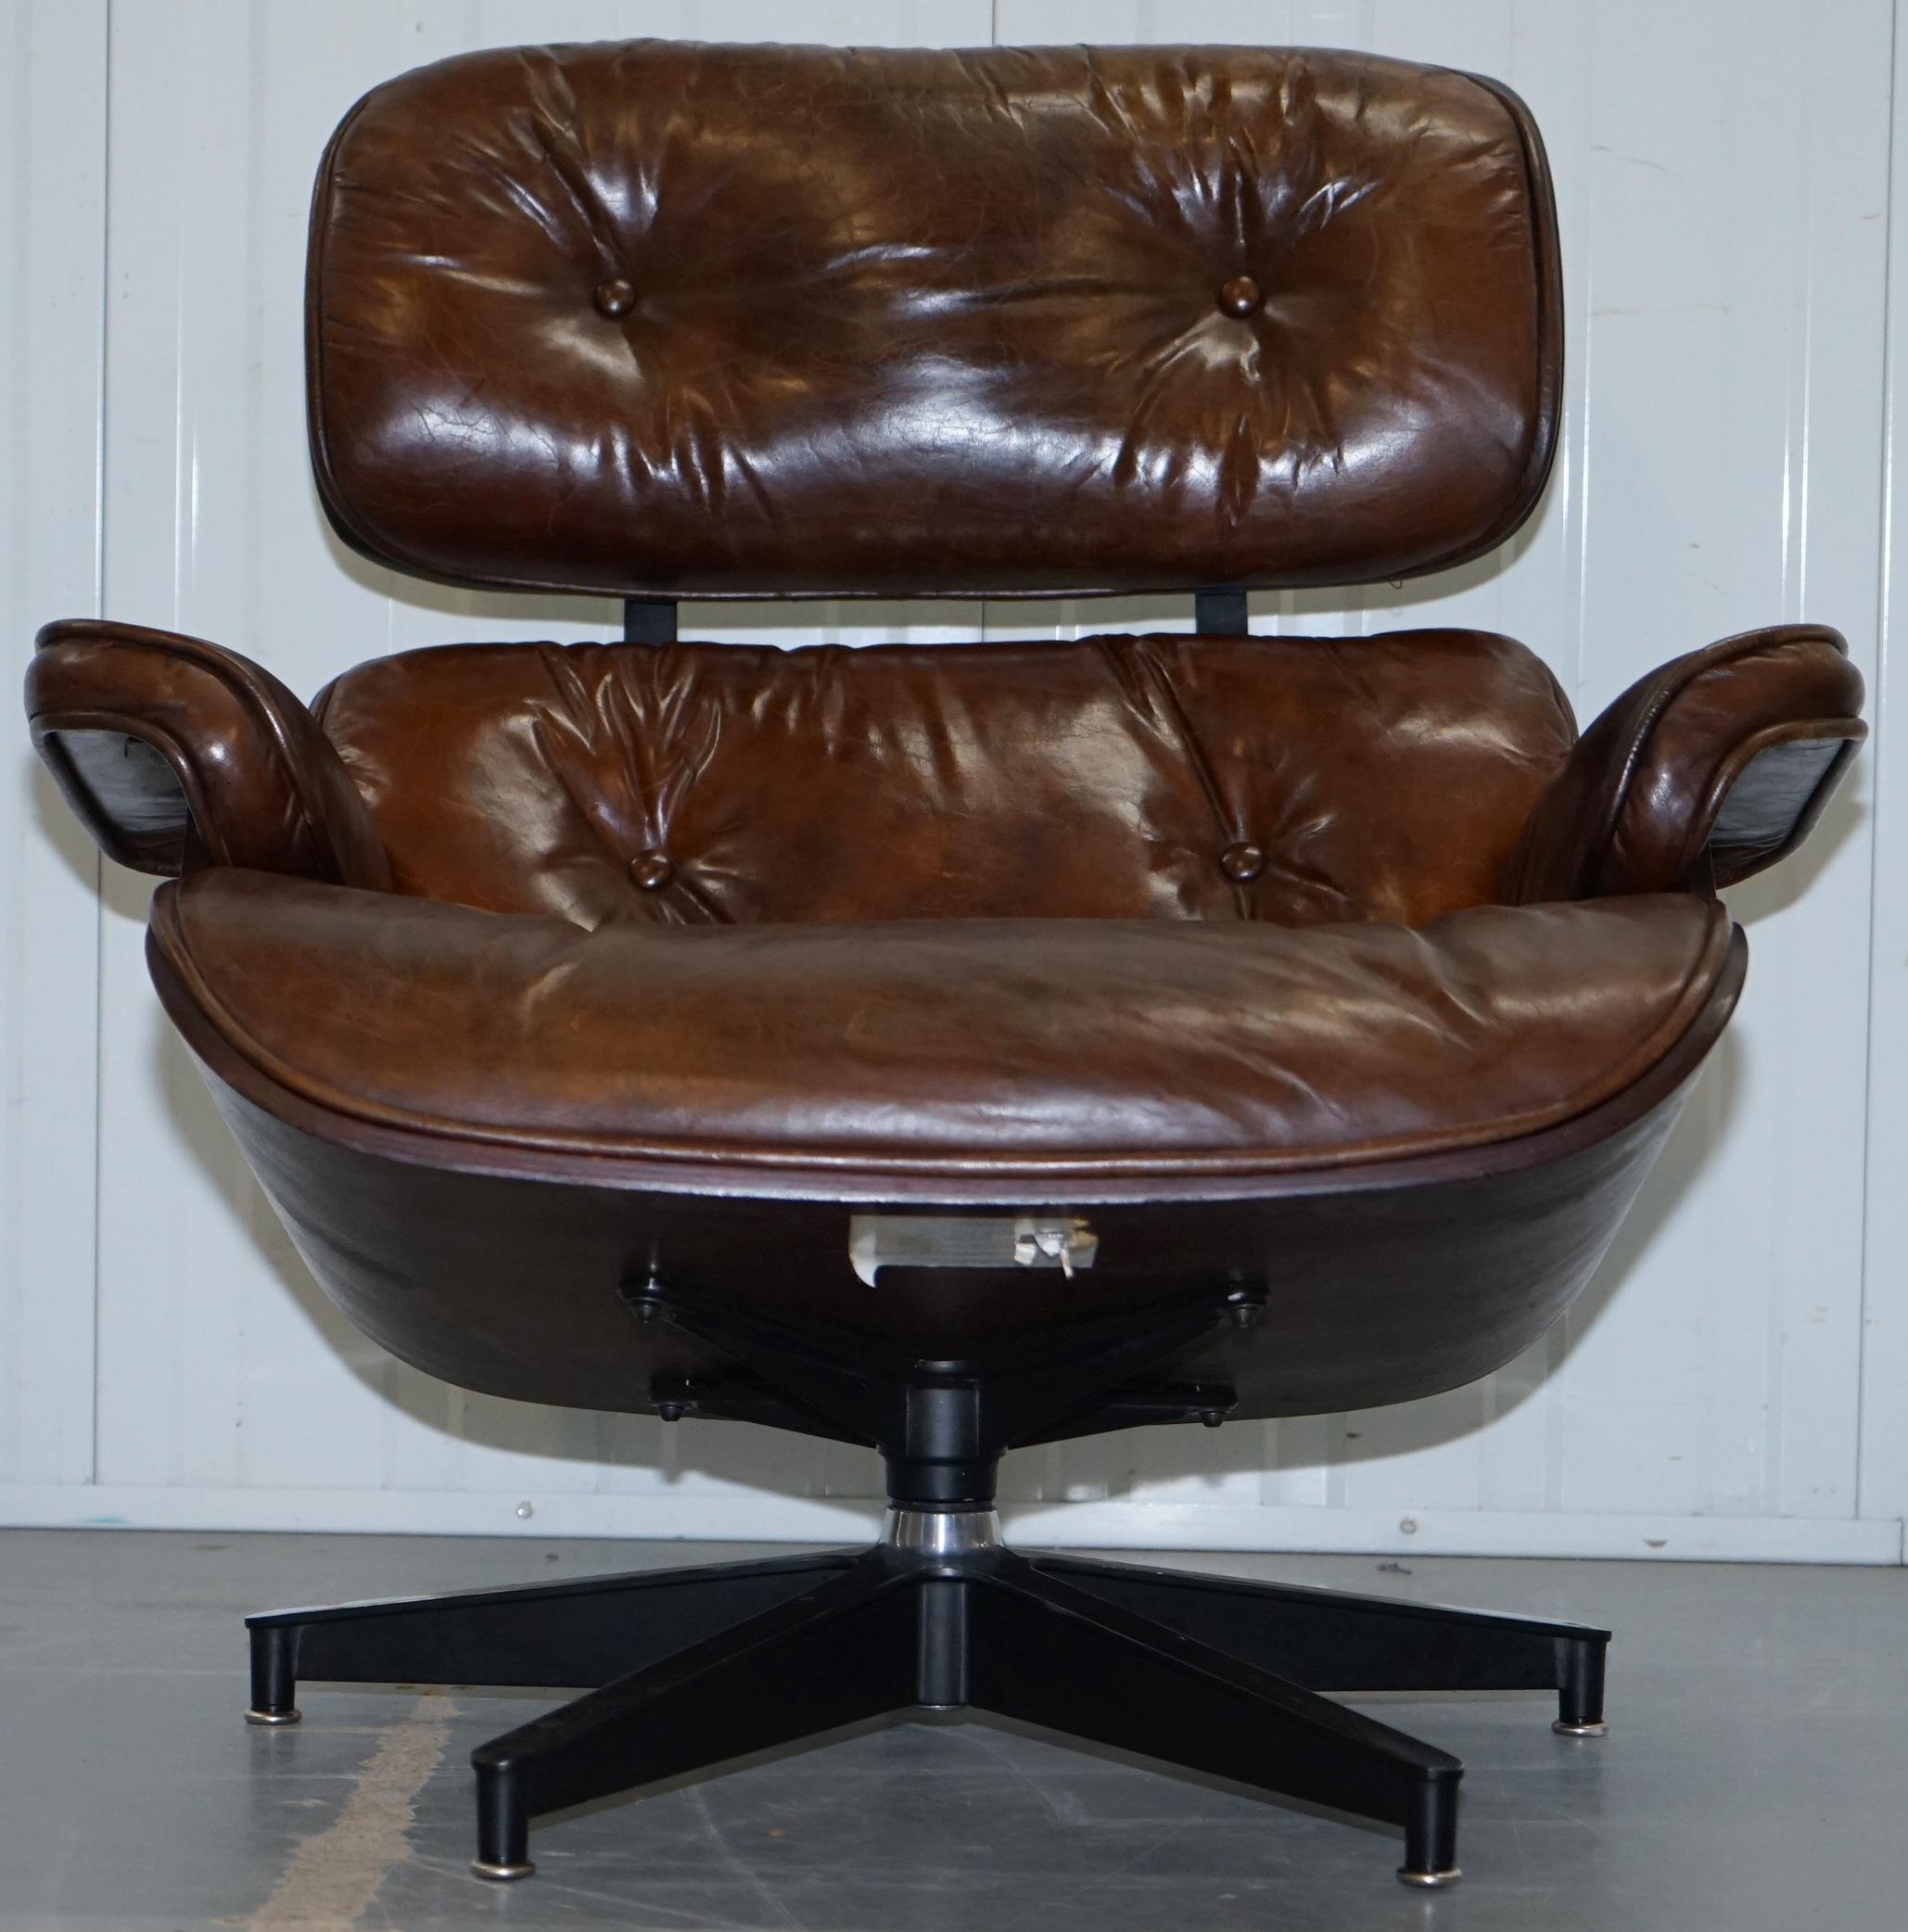 20th Century VINTAGE HERITAGE BROWN LEATHER LOUNGE ARMCHAIR & MATCHInG OTTOMAN FOOTSTOOL